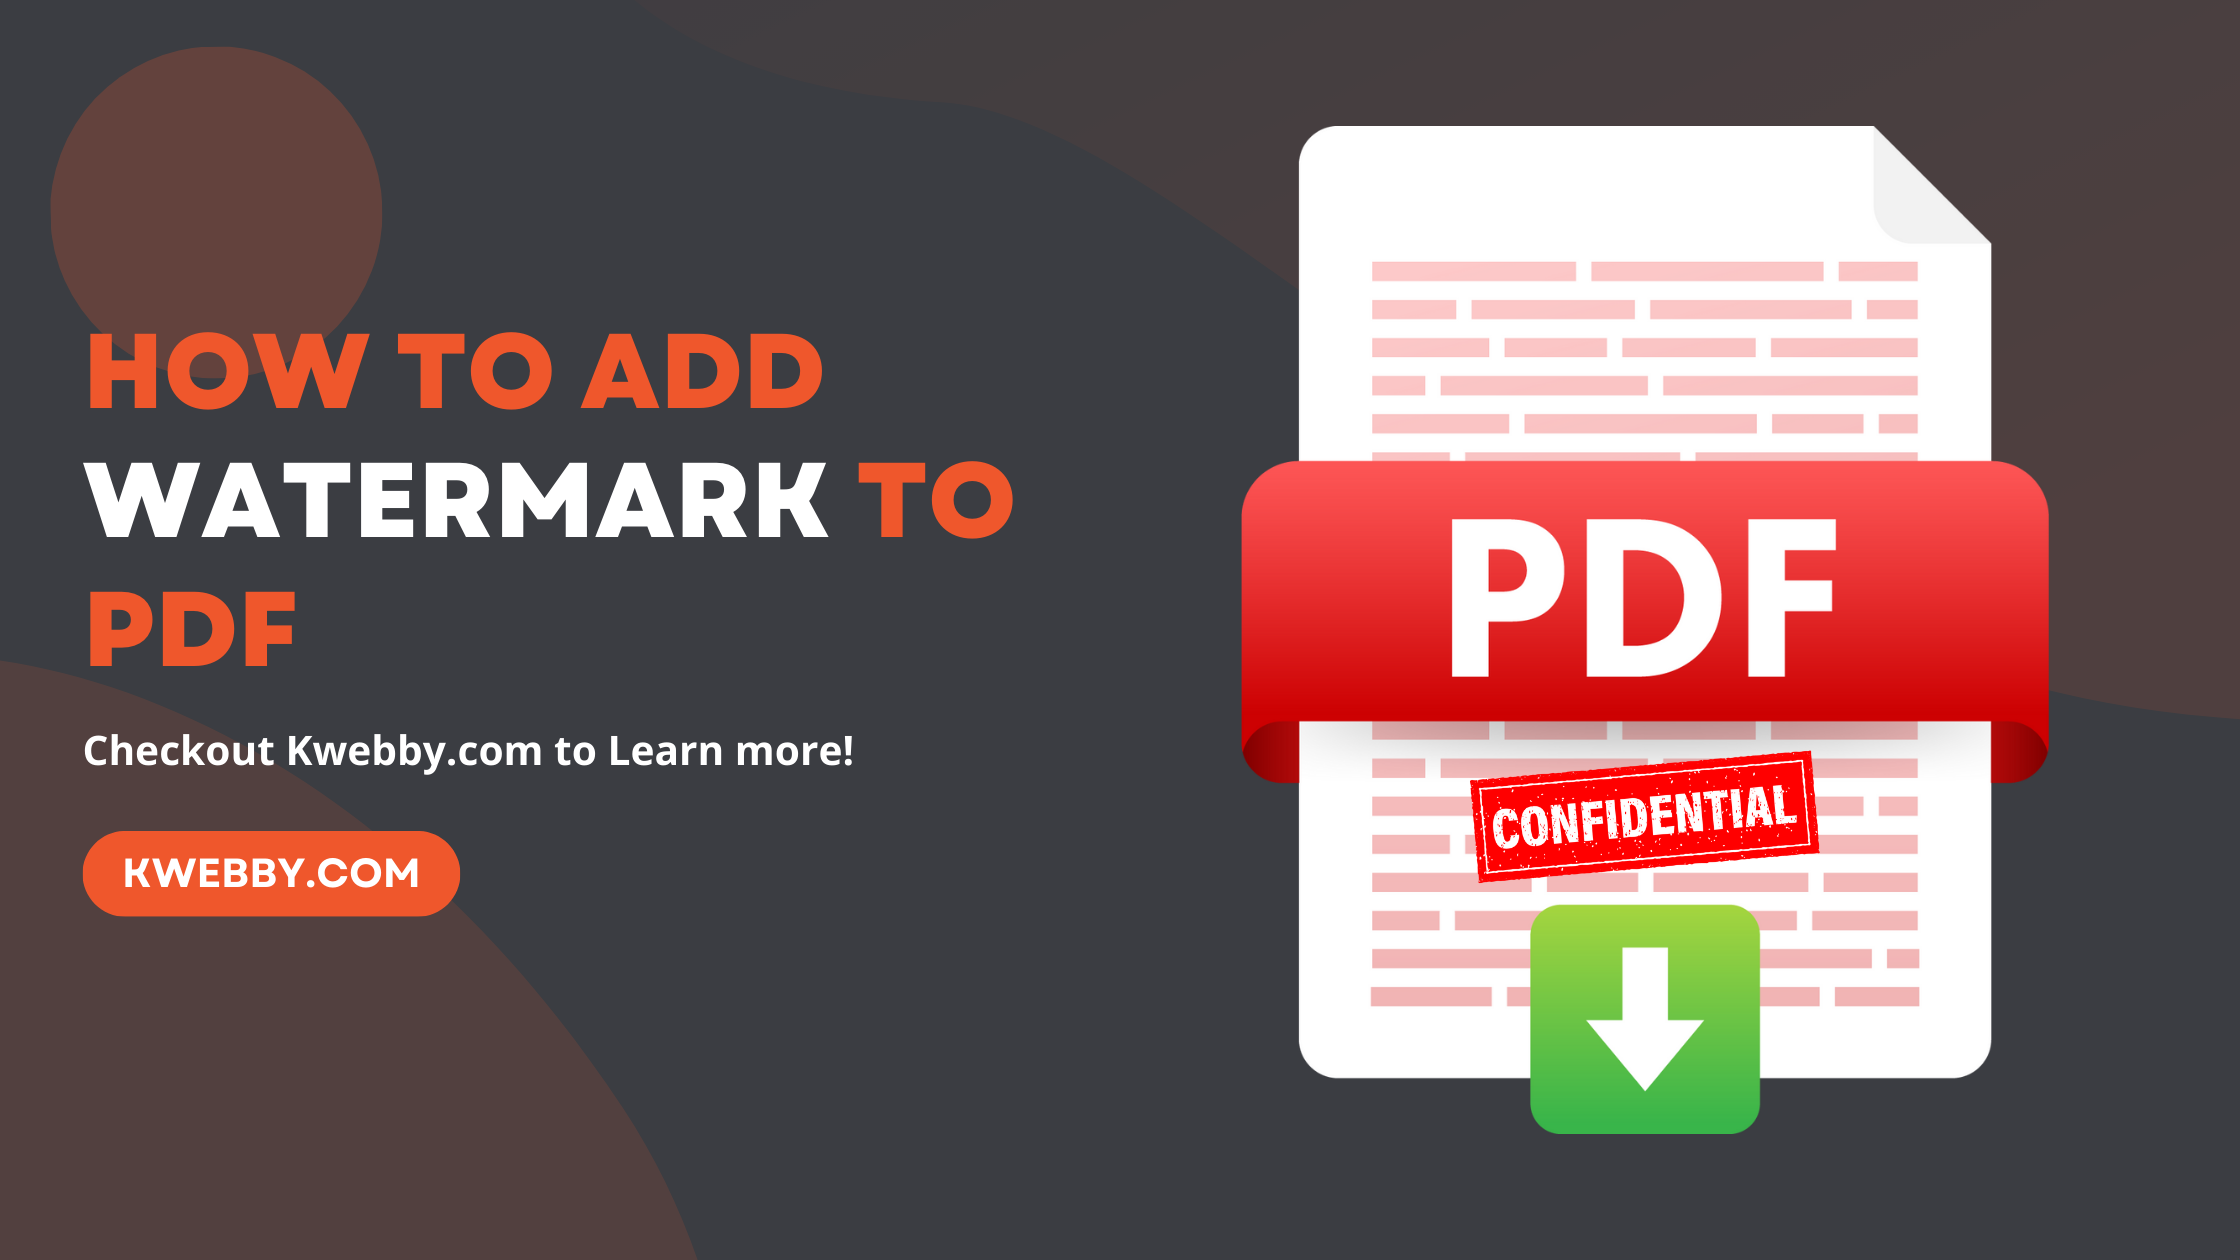 How to Add Watermark to PDF (3 Easy Ways)